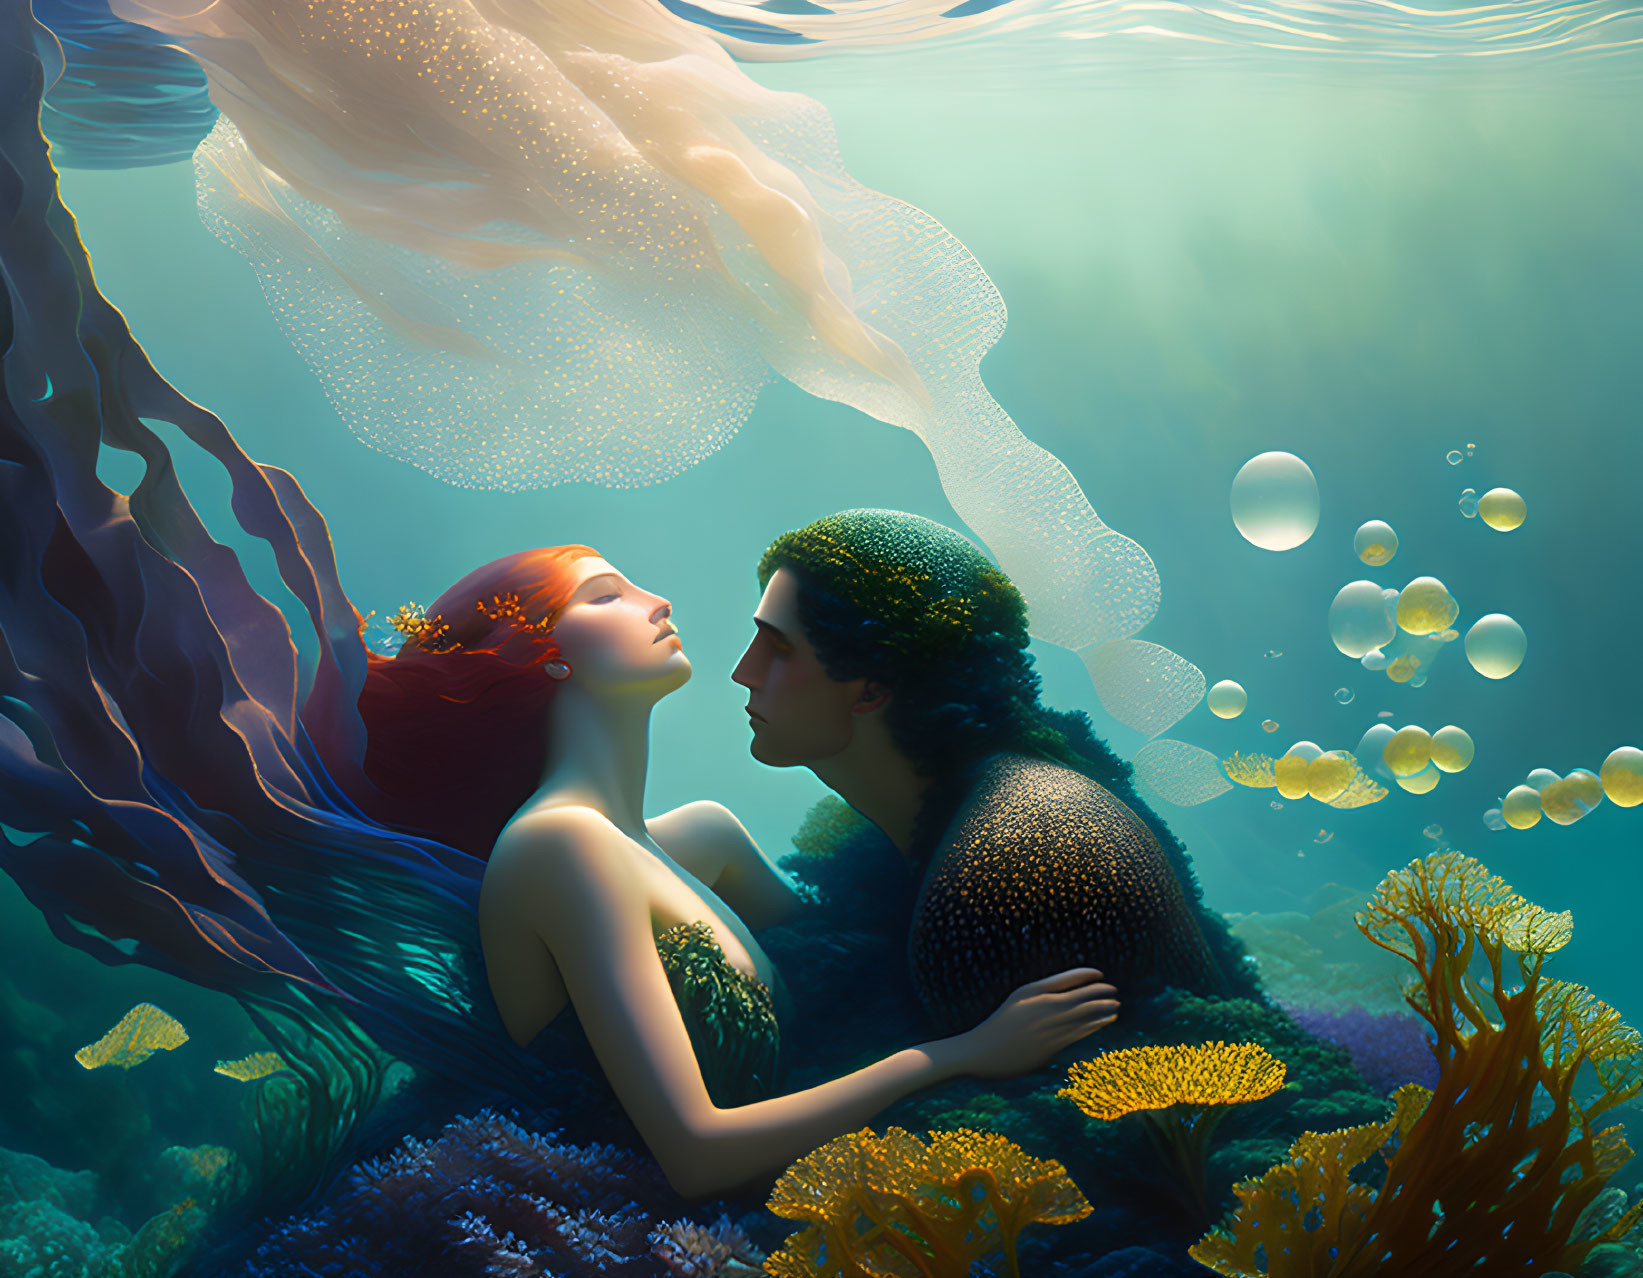 Illustrated underwater scene with embracing ethereal beings, jellyfish, bubbles, vibrant coral